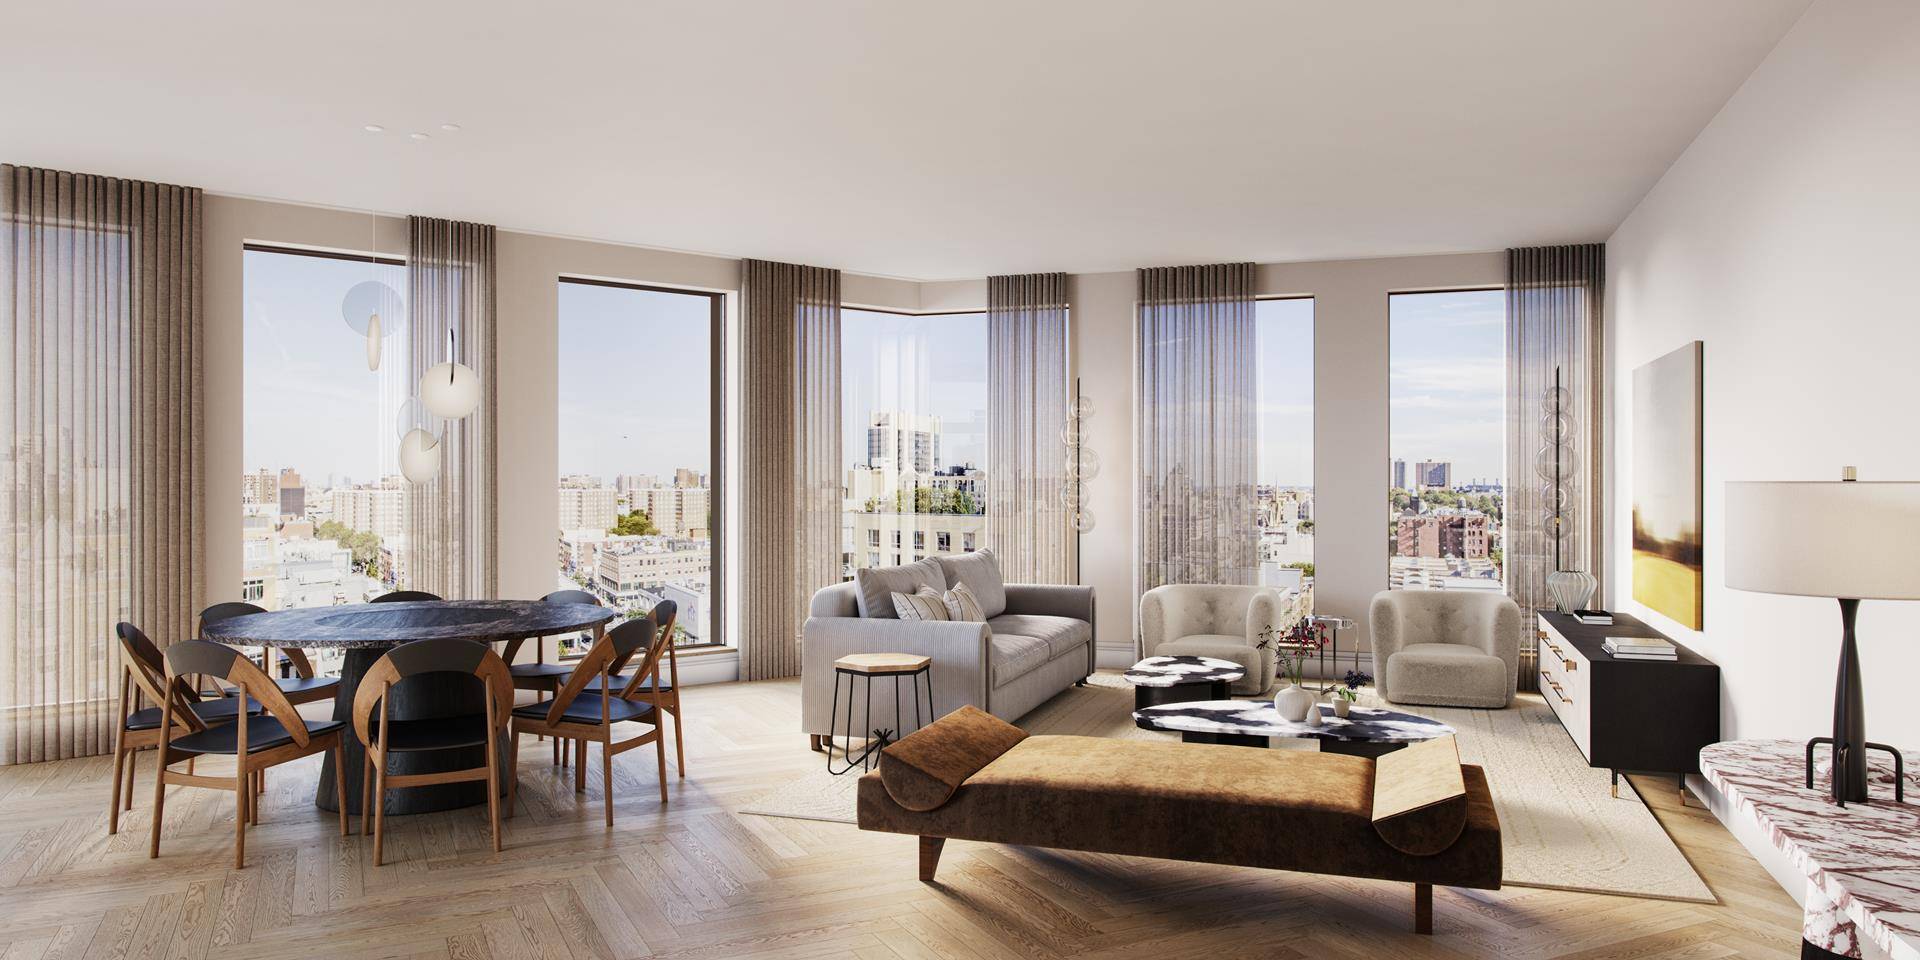 Sales Gallery Now Open By Appointment Introducing residence 8B at 300 West, a 1, 000 square foot eastern facing two bedroom, two bathroom, offering an enormous living and dining area ...